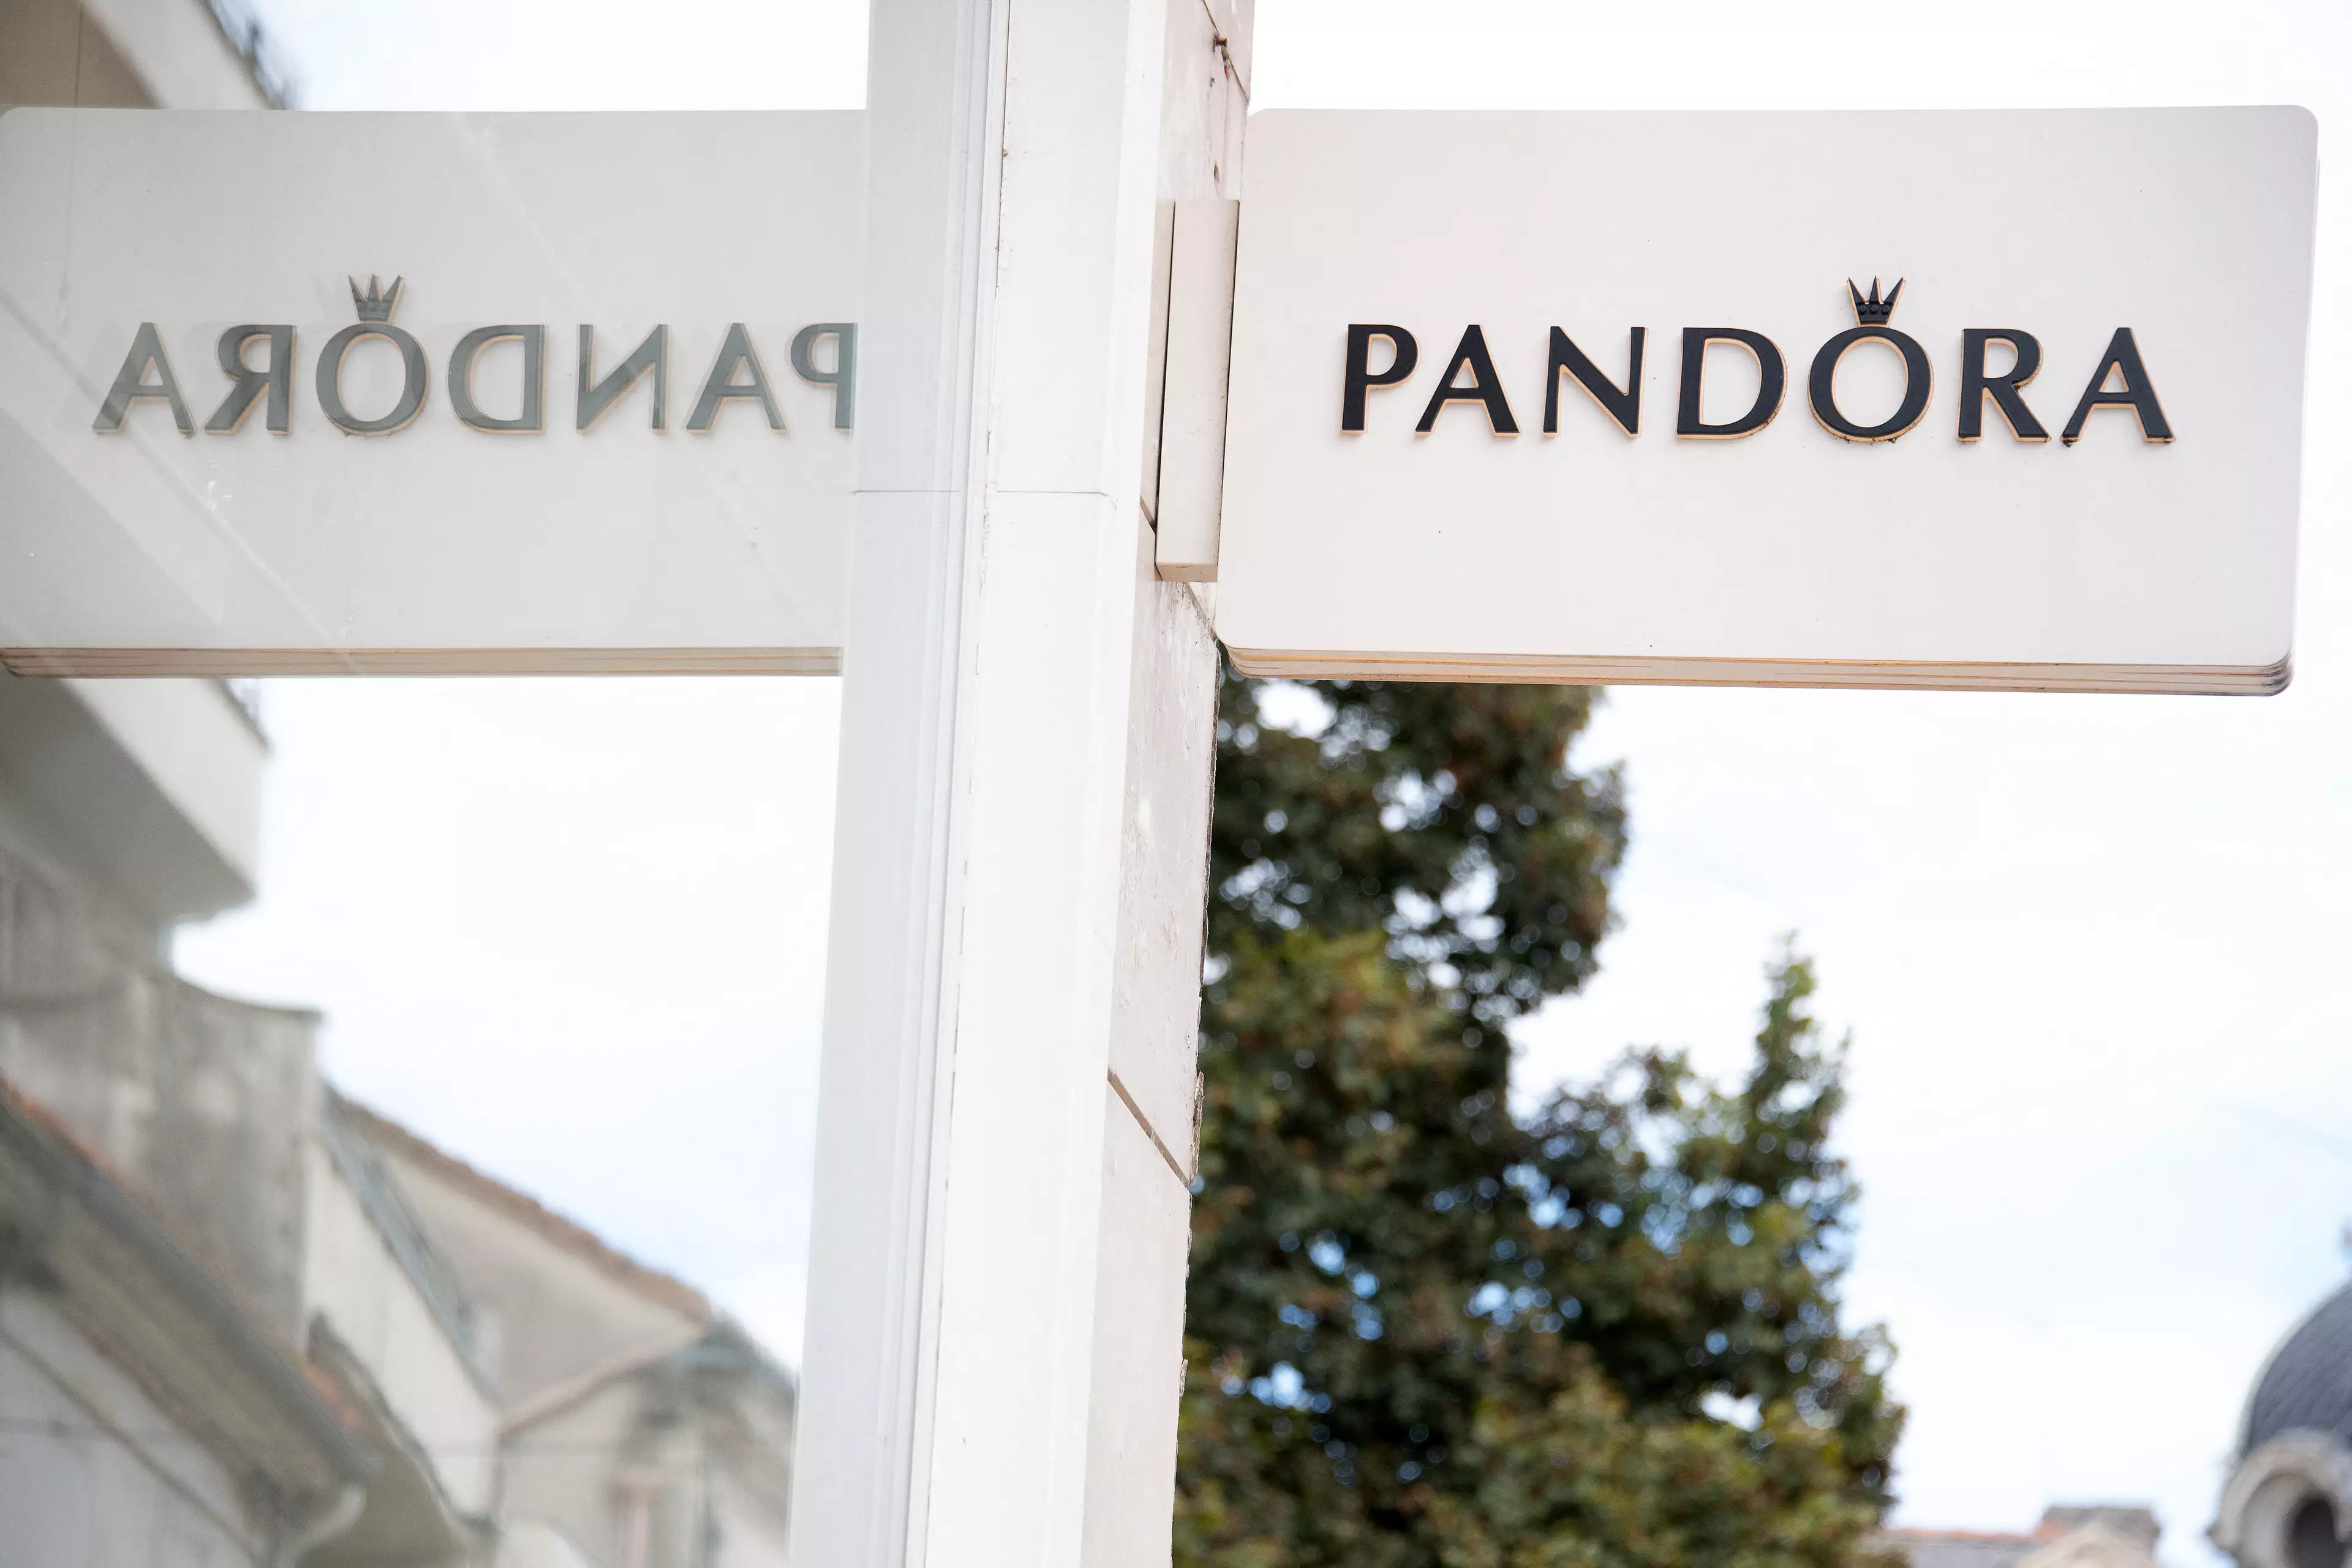 The outlet is a secret for fans of Pandora products (